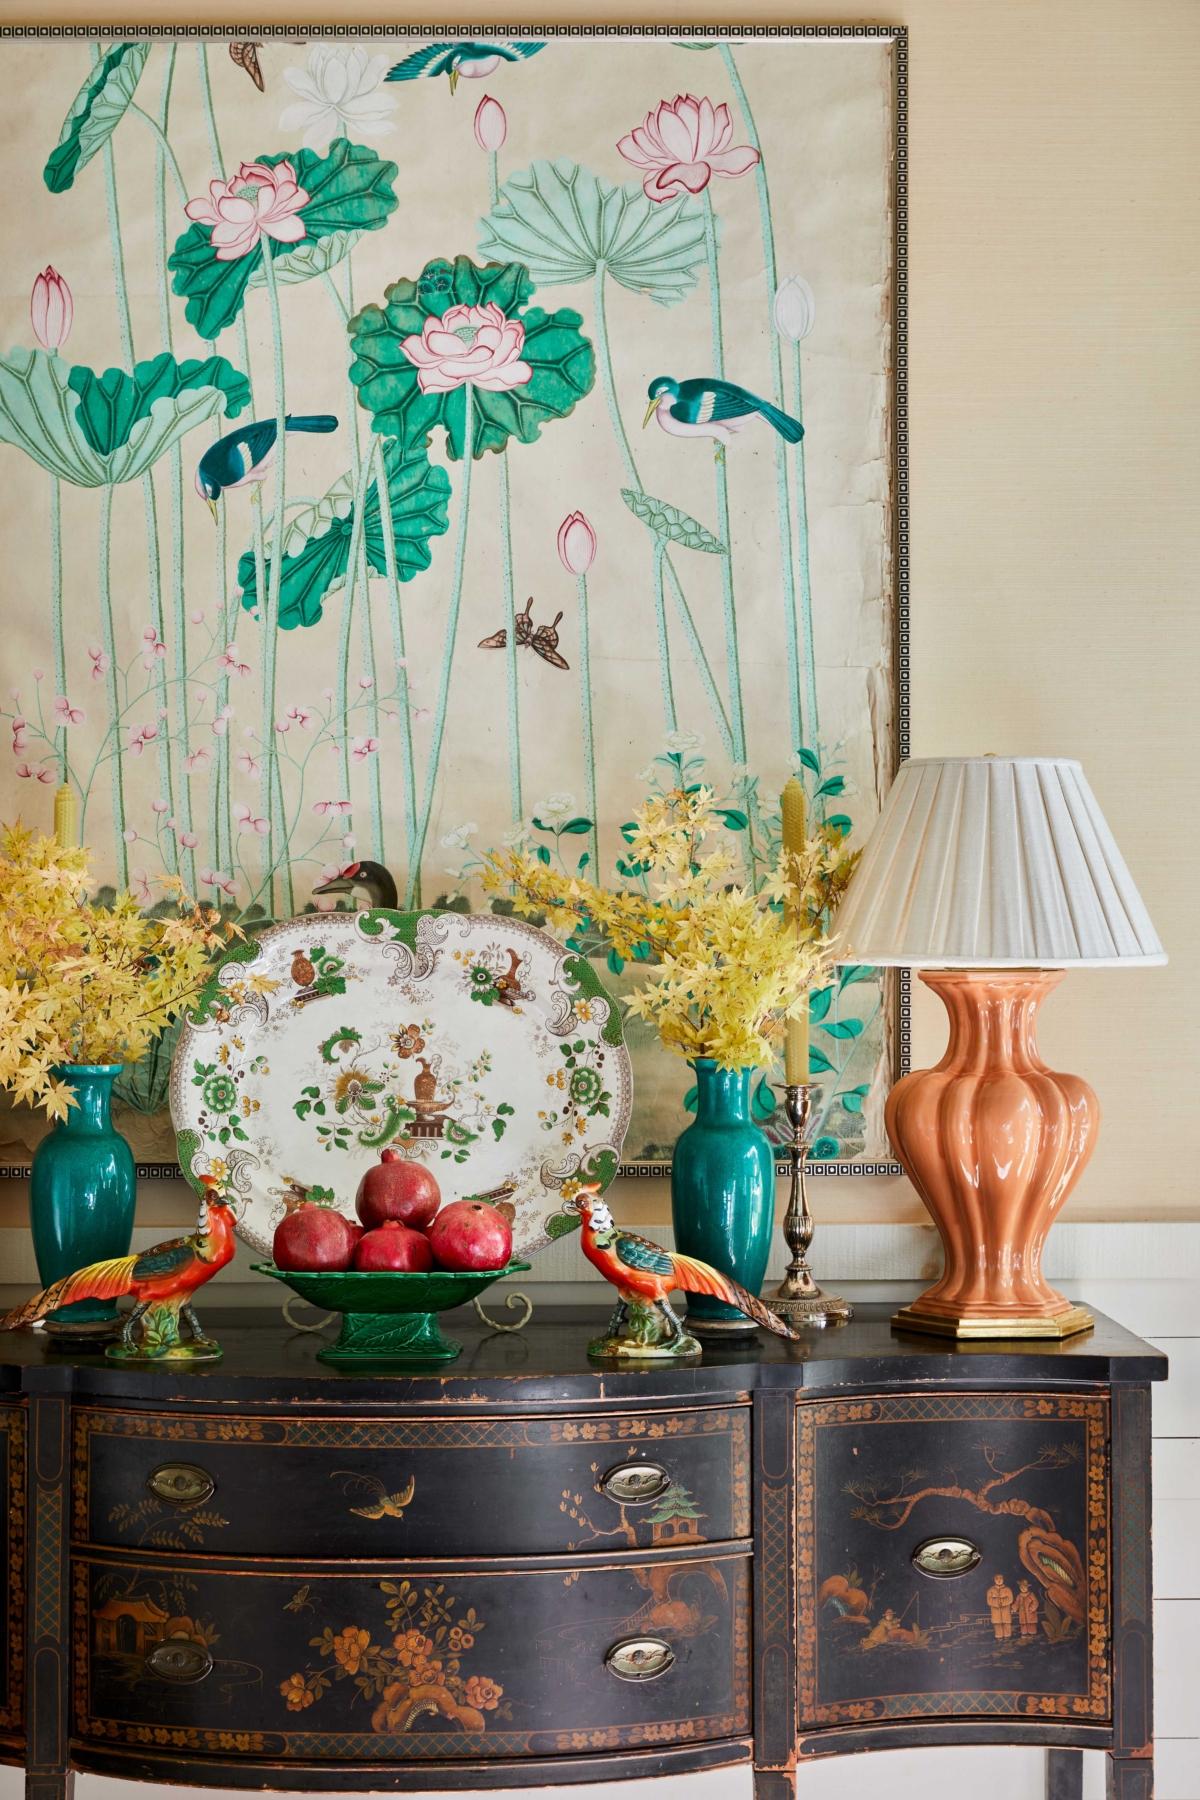 Yellow Japanese maple, antique jade vases, peachy glazed lamps, and pomegranates— part of Farmer’s mother’s family crest—decorate the sideboard in the dining room at Farmdale. (Emily Followill)